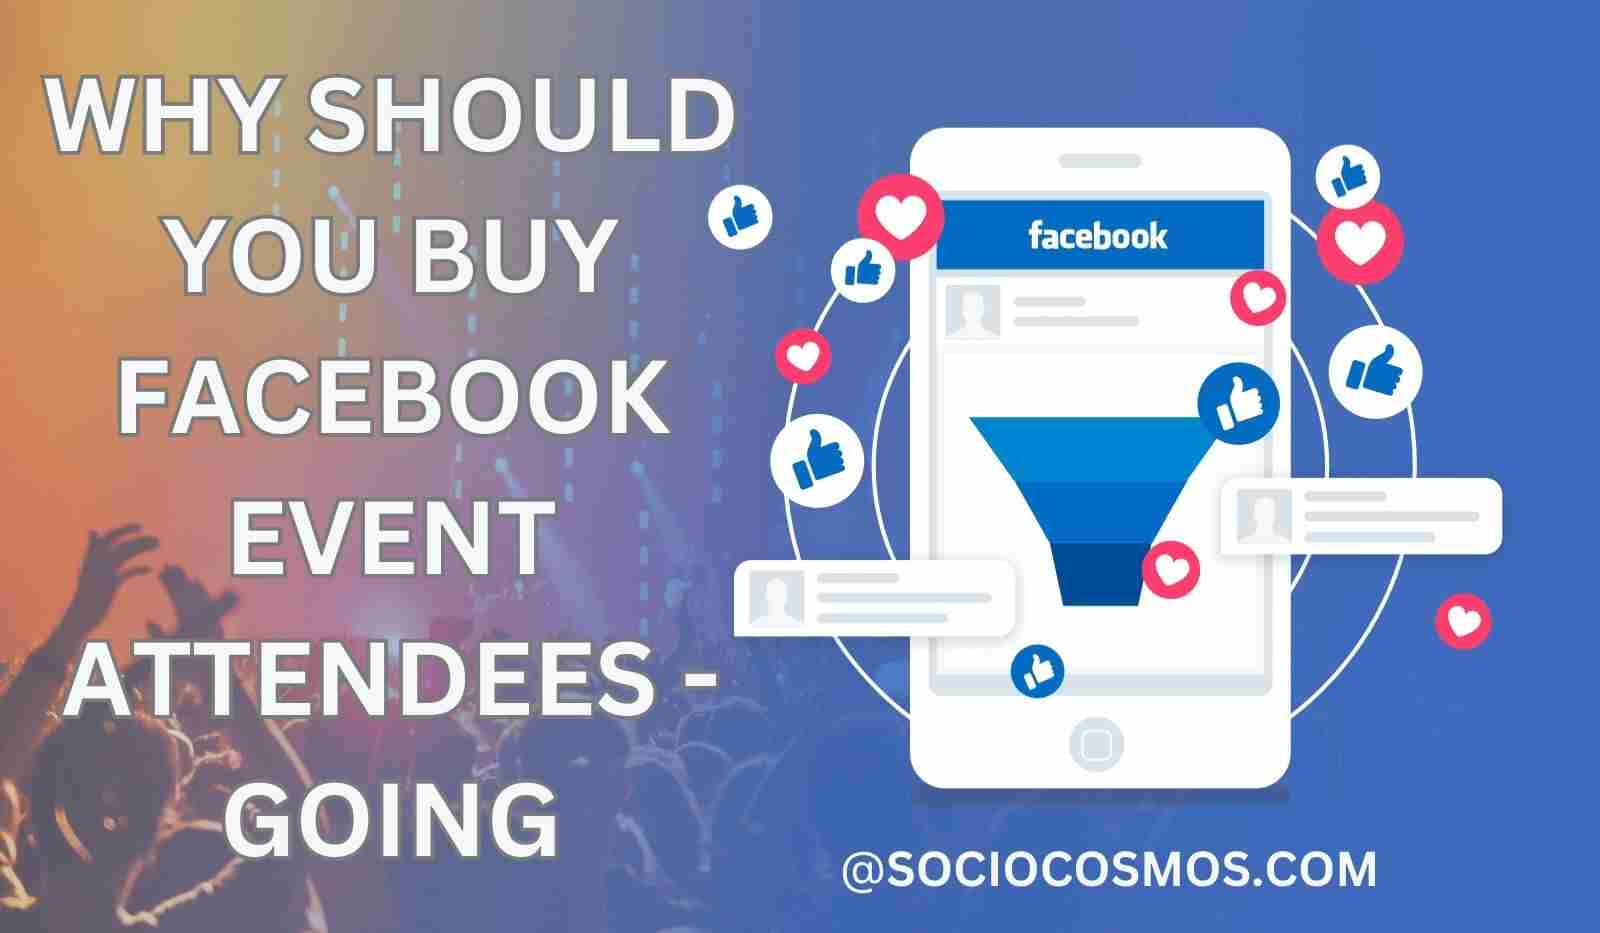 WHY SHOULD YOU BUY FACEBOOK EVENT ATTENDEES - GOING